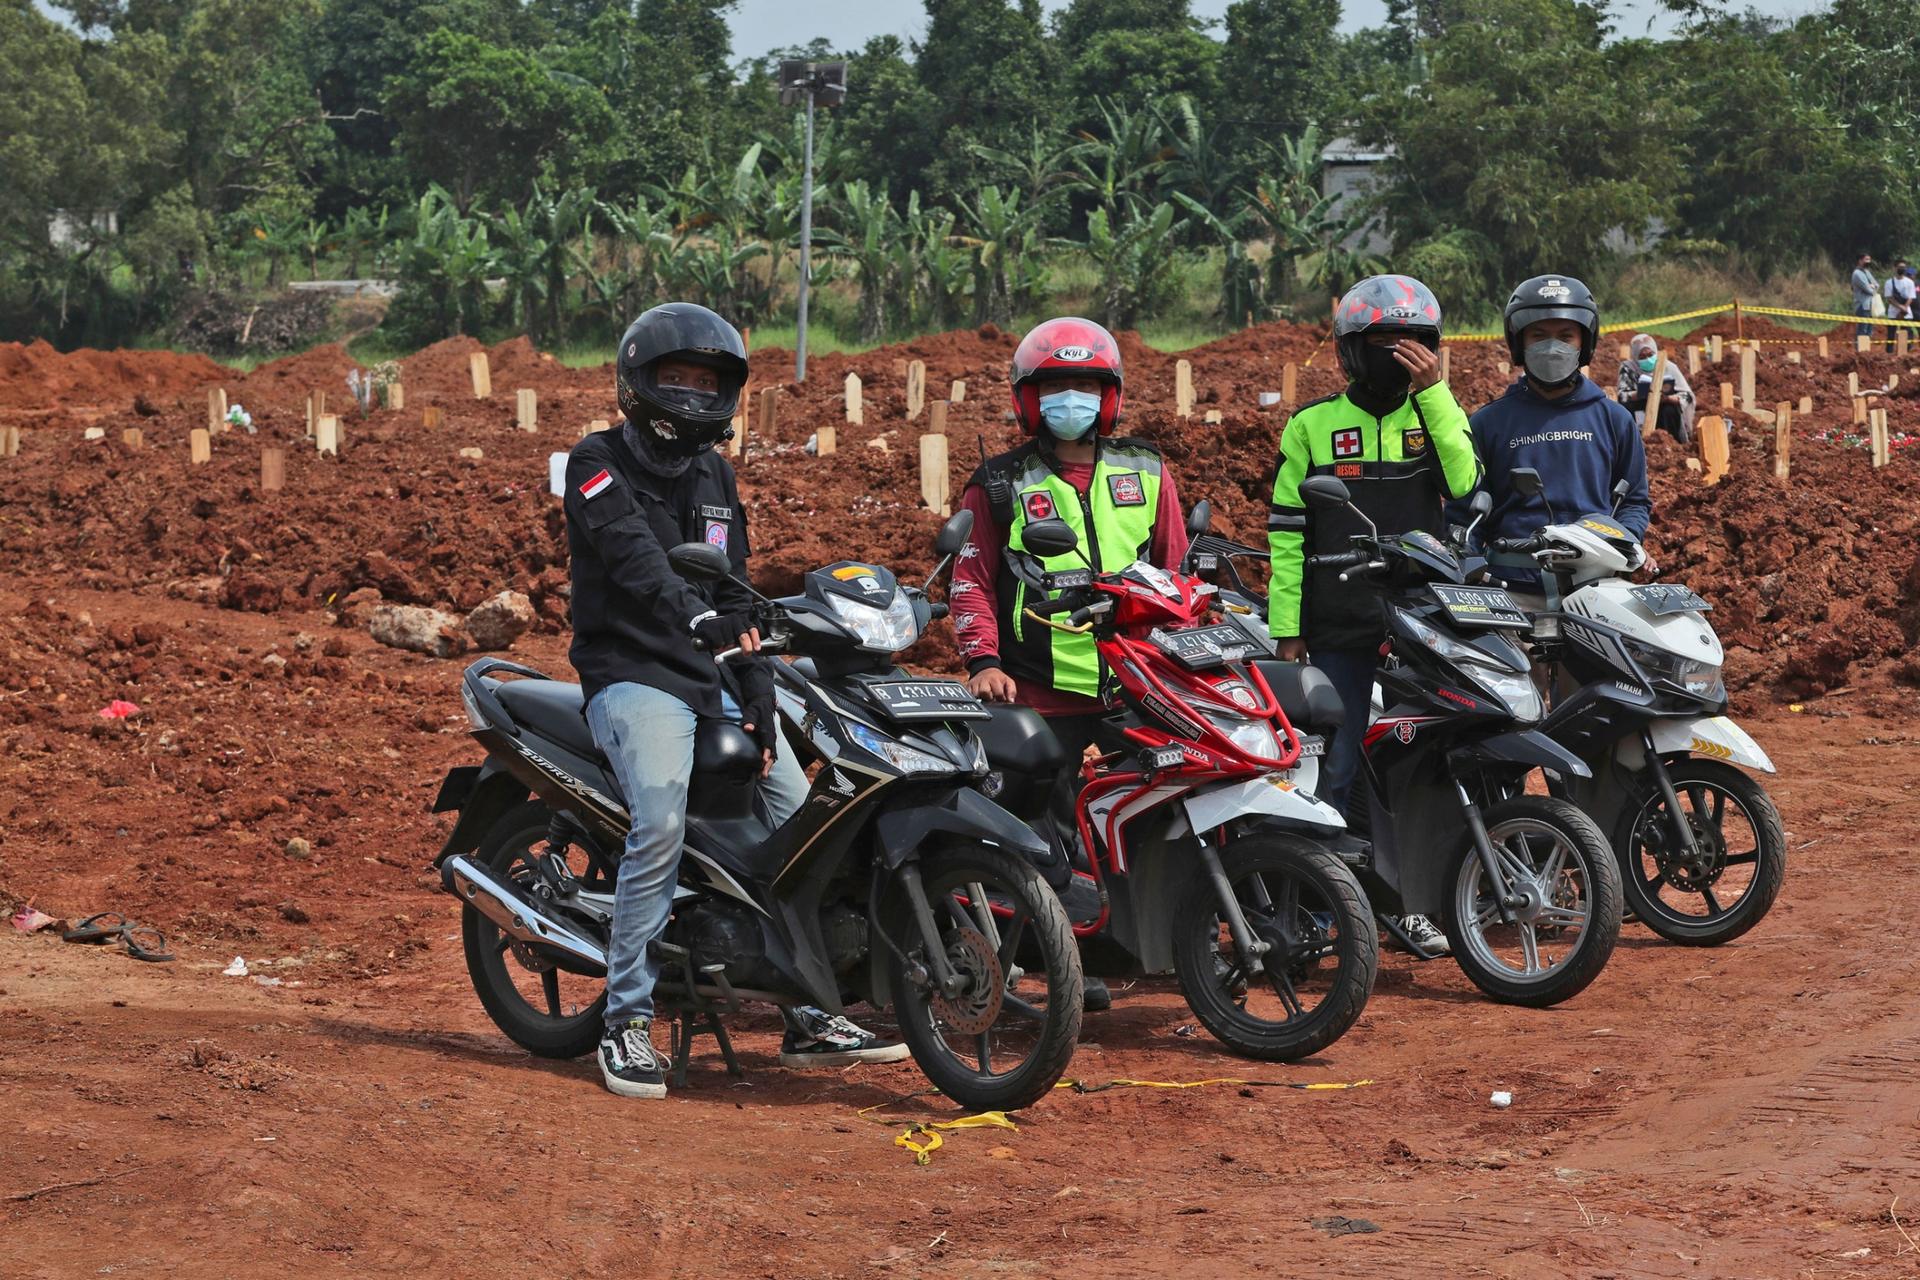 Four people are shown sitting or standing next to motorbikes with a cemetary in the background.